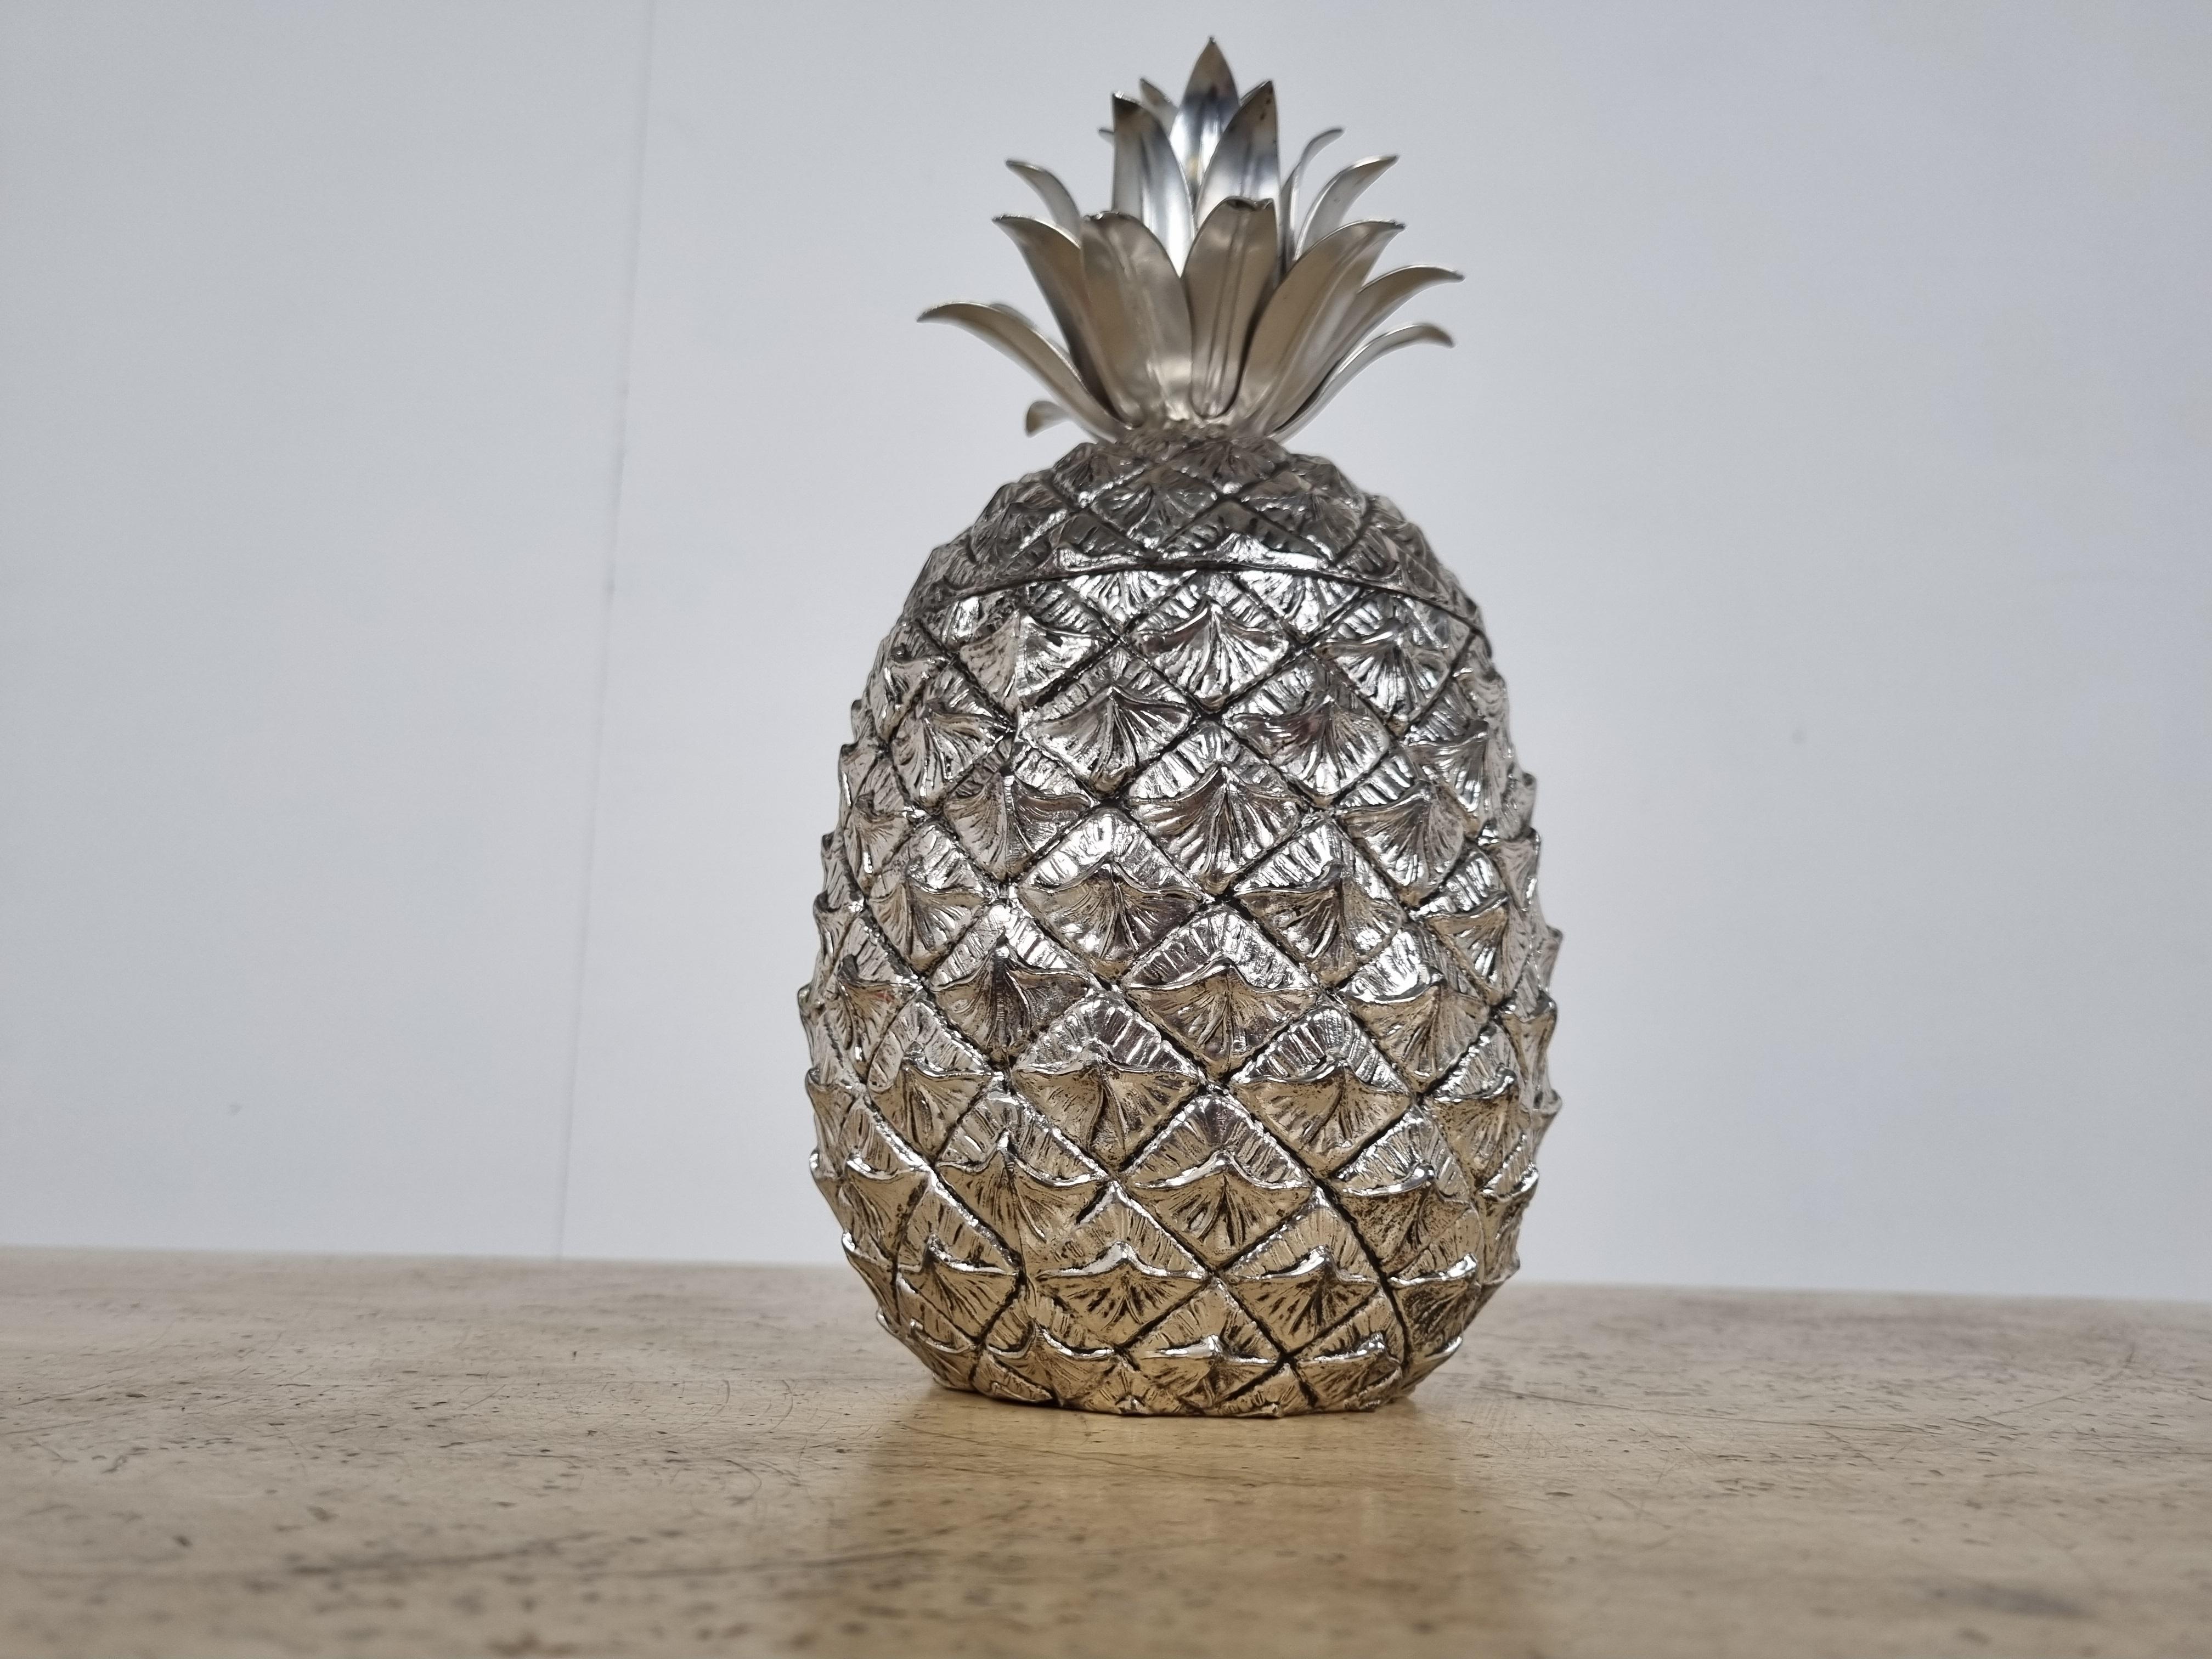 Vintage pineapple ice bucket signed by Mauro Manetti.

This high quality ice bucket is a real collector's item and has a luxurious appeal.

Original, 1960s.

Good condition

Dimensions:
Height: 25cm/9.84